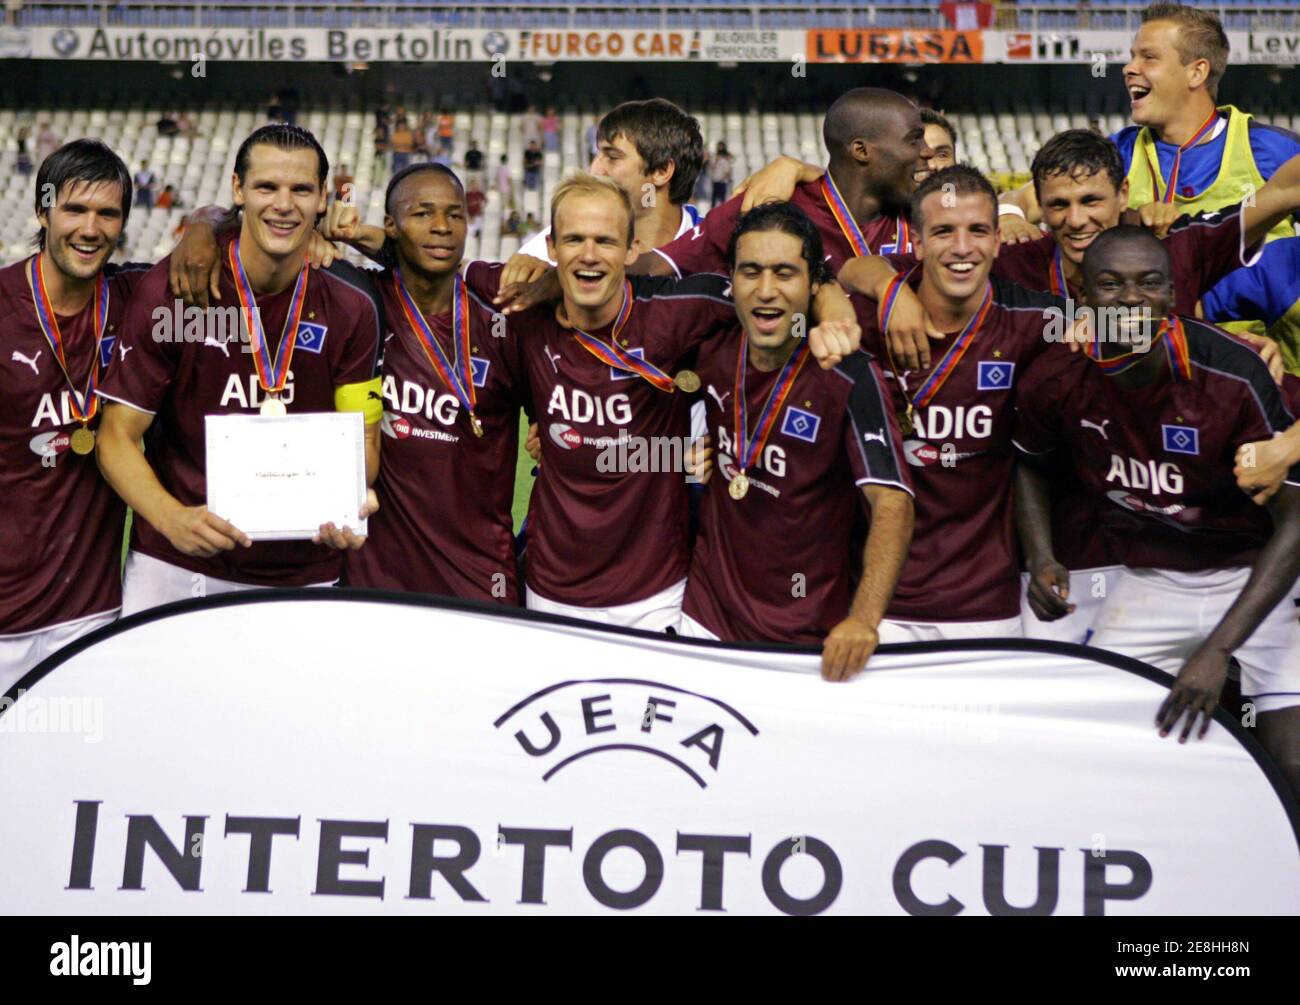 Hamburg's players celebrate after winning the UEFA Intertoto Cup final  against Valencia at Mestalla stadium in Valencia August 23, 2005. Hamburg  booked their place in this season's UEFA Cup after they held